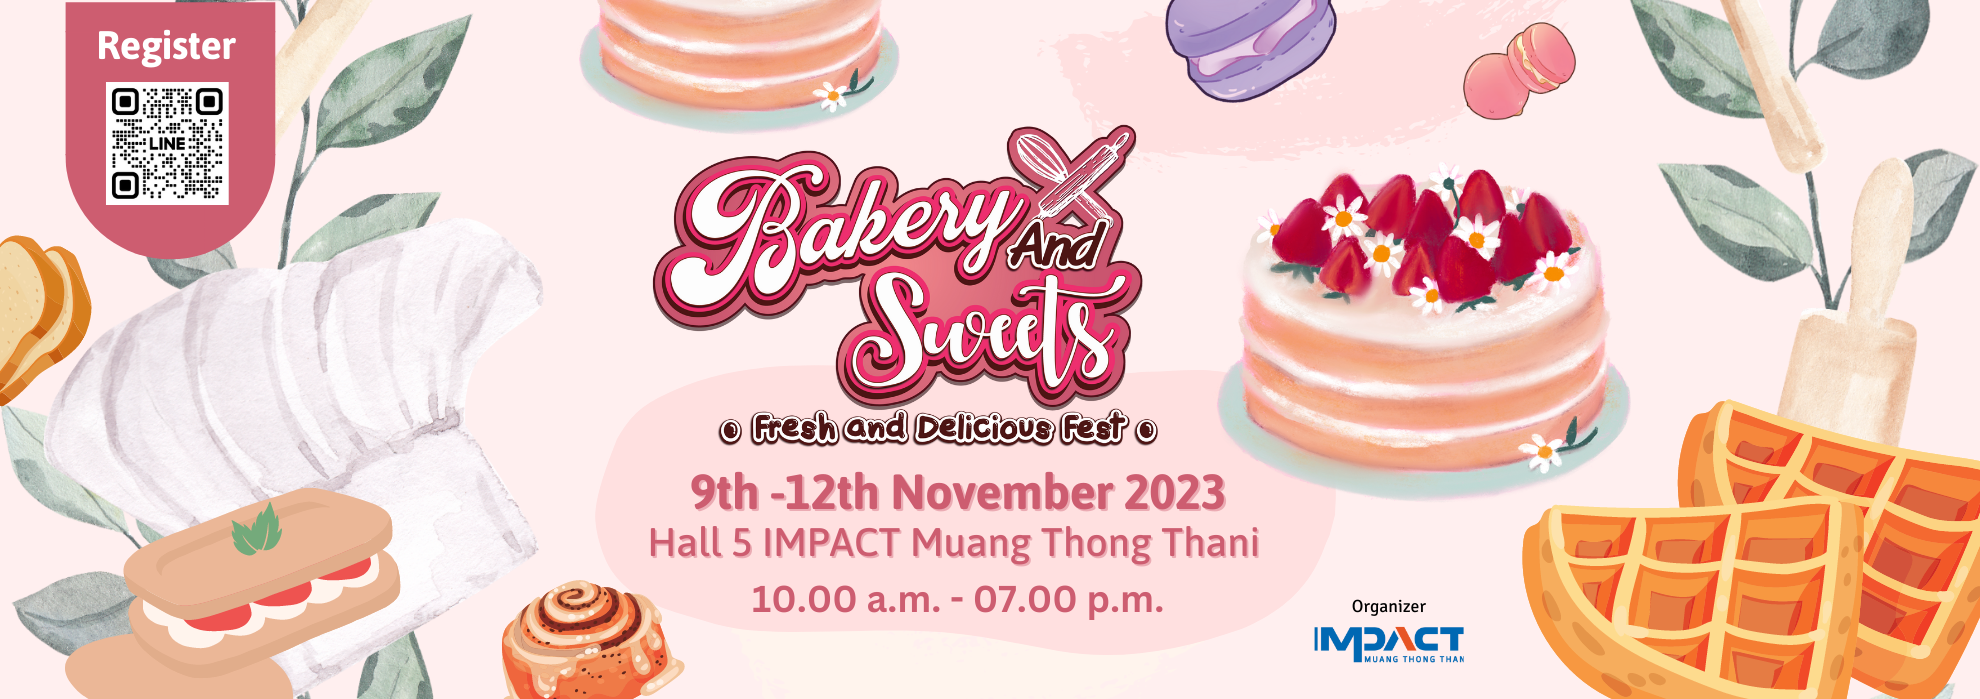 Bakery & Sweets Festival Thailand’s fresh and delicious festival